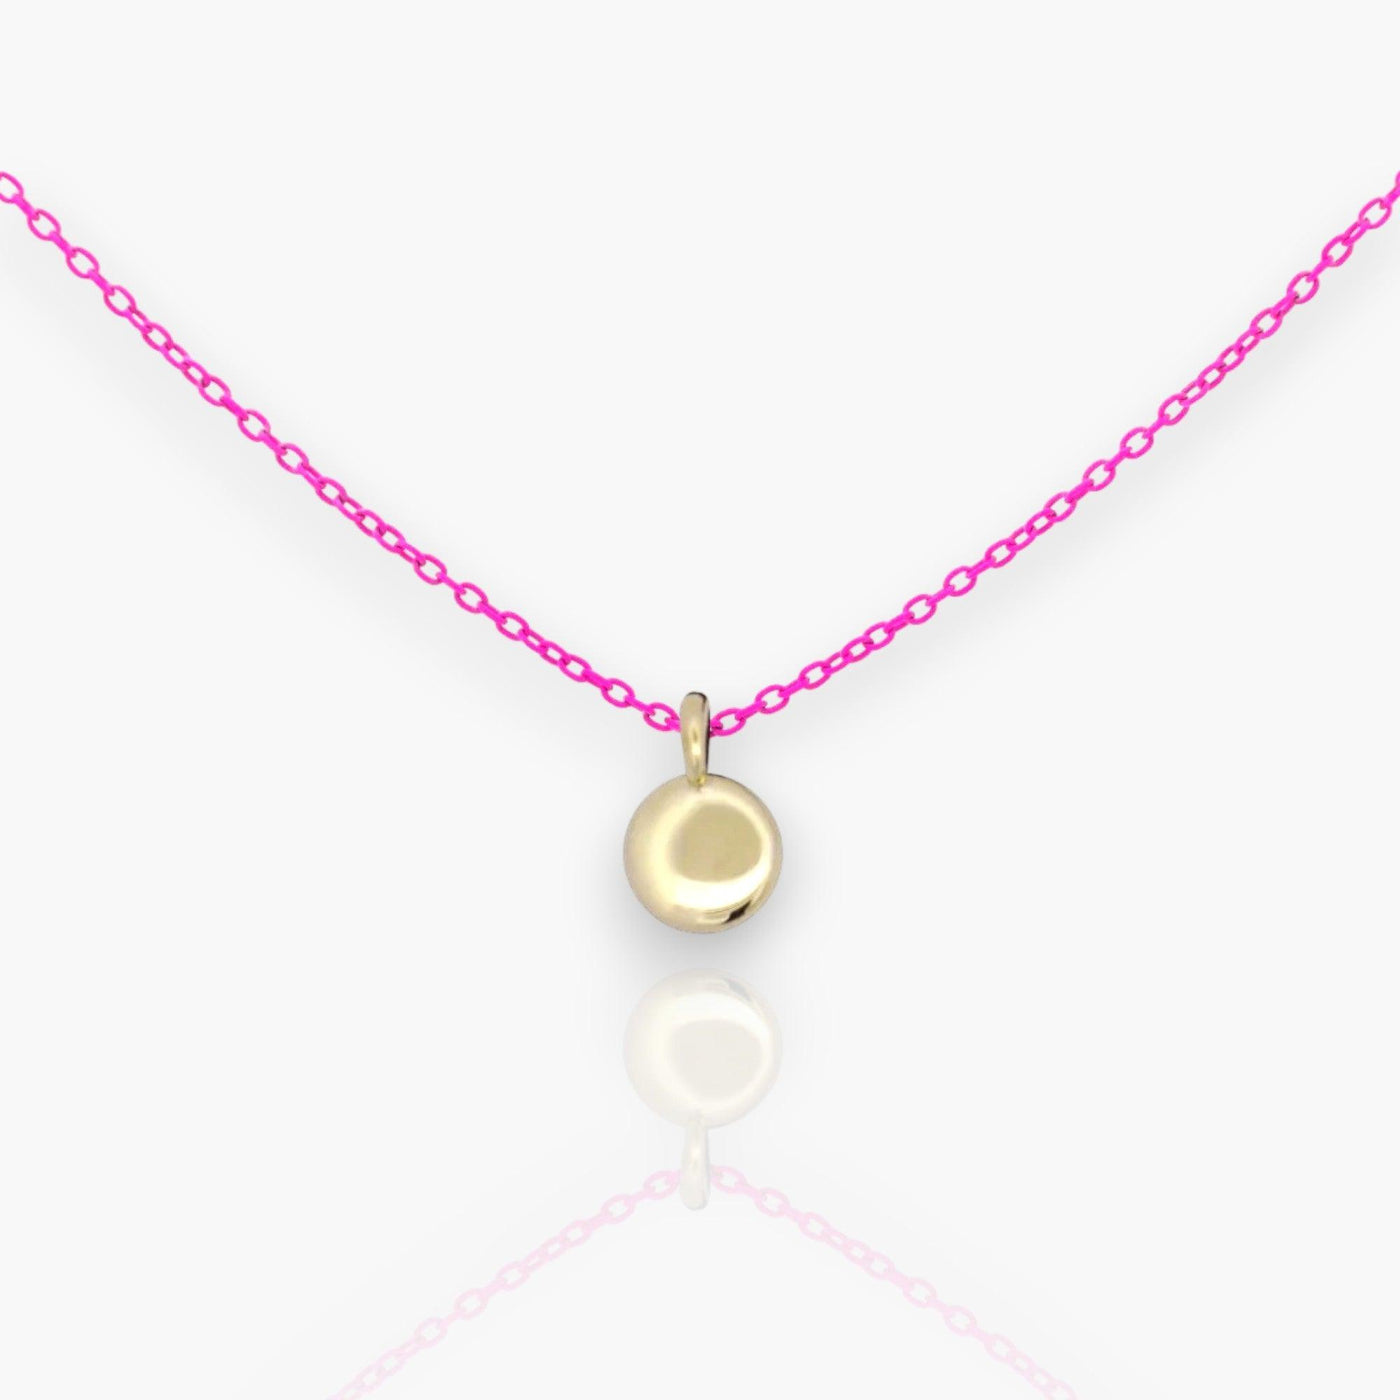 18K Gold choker with round medal - Moregola Fine Jewelry